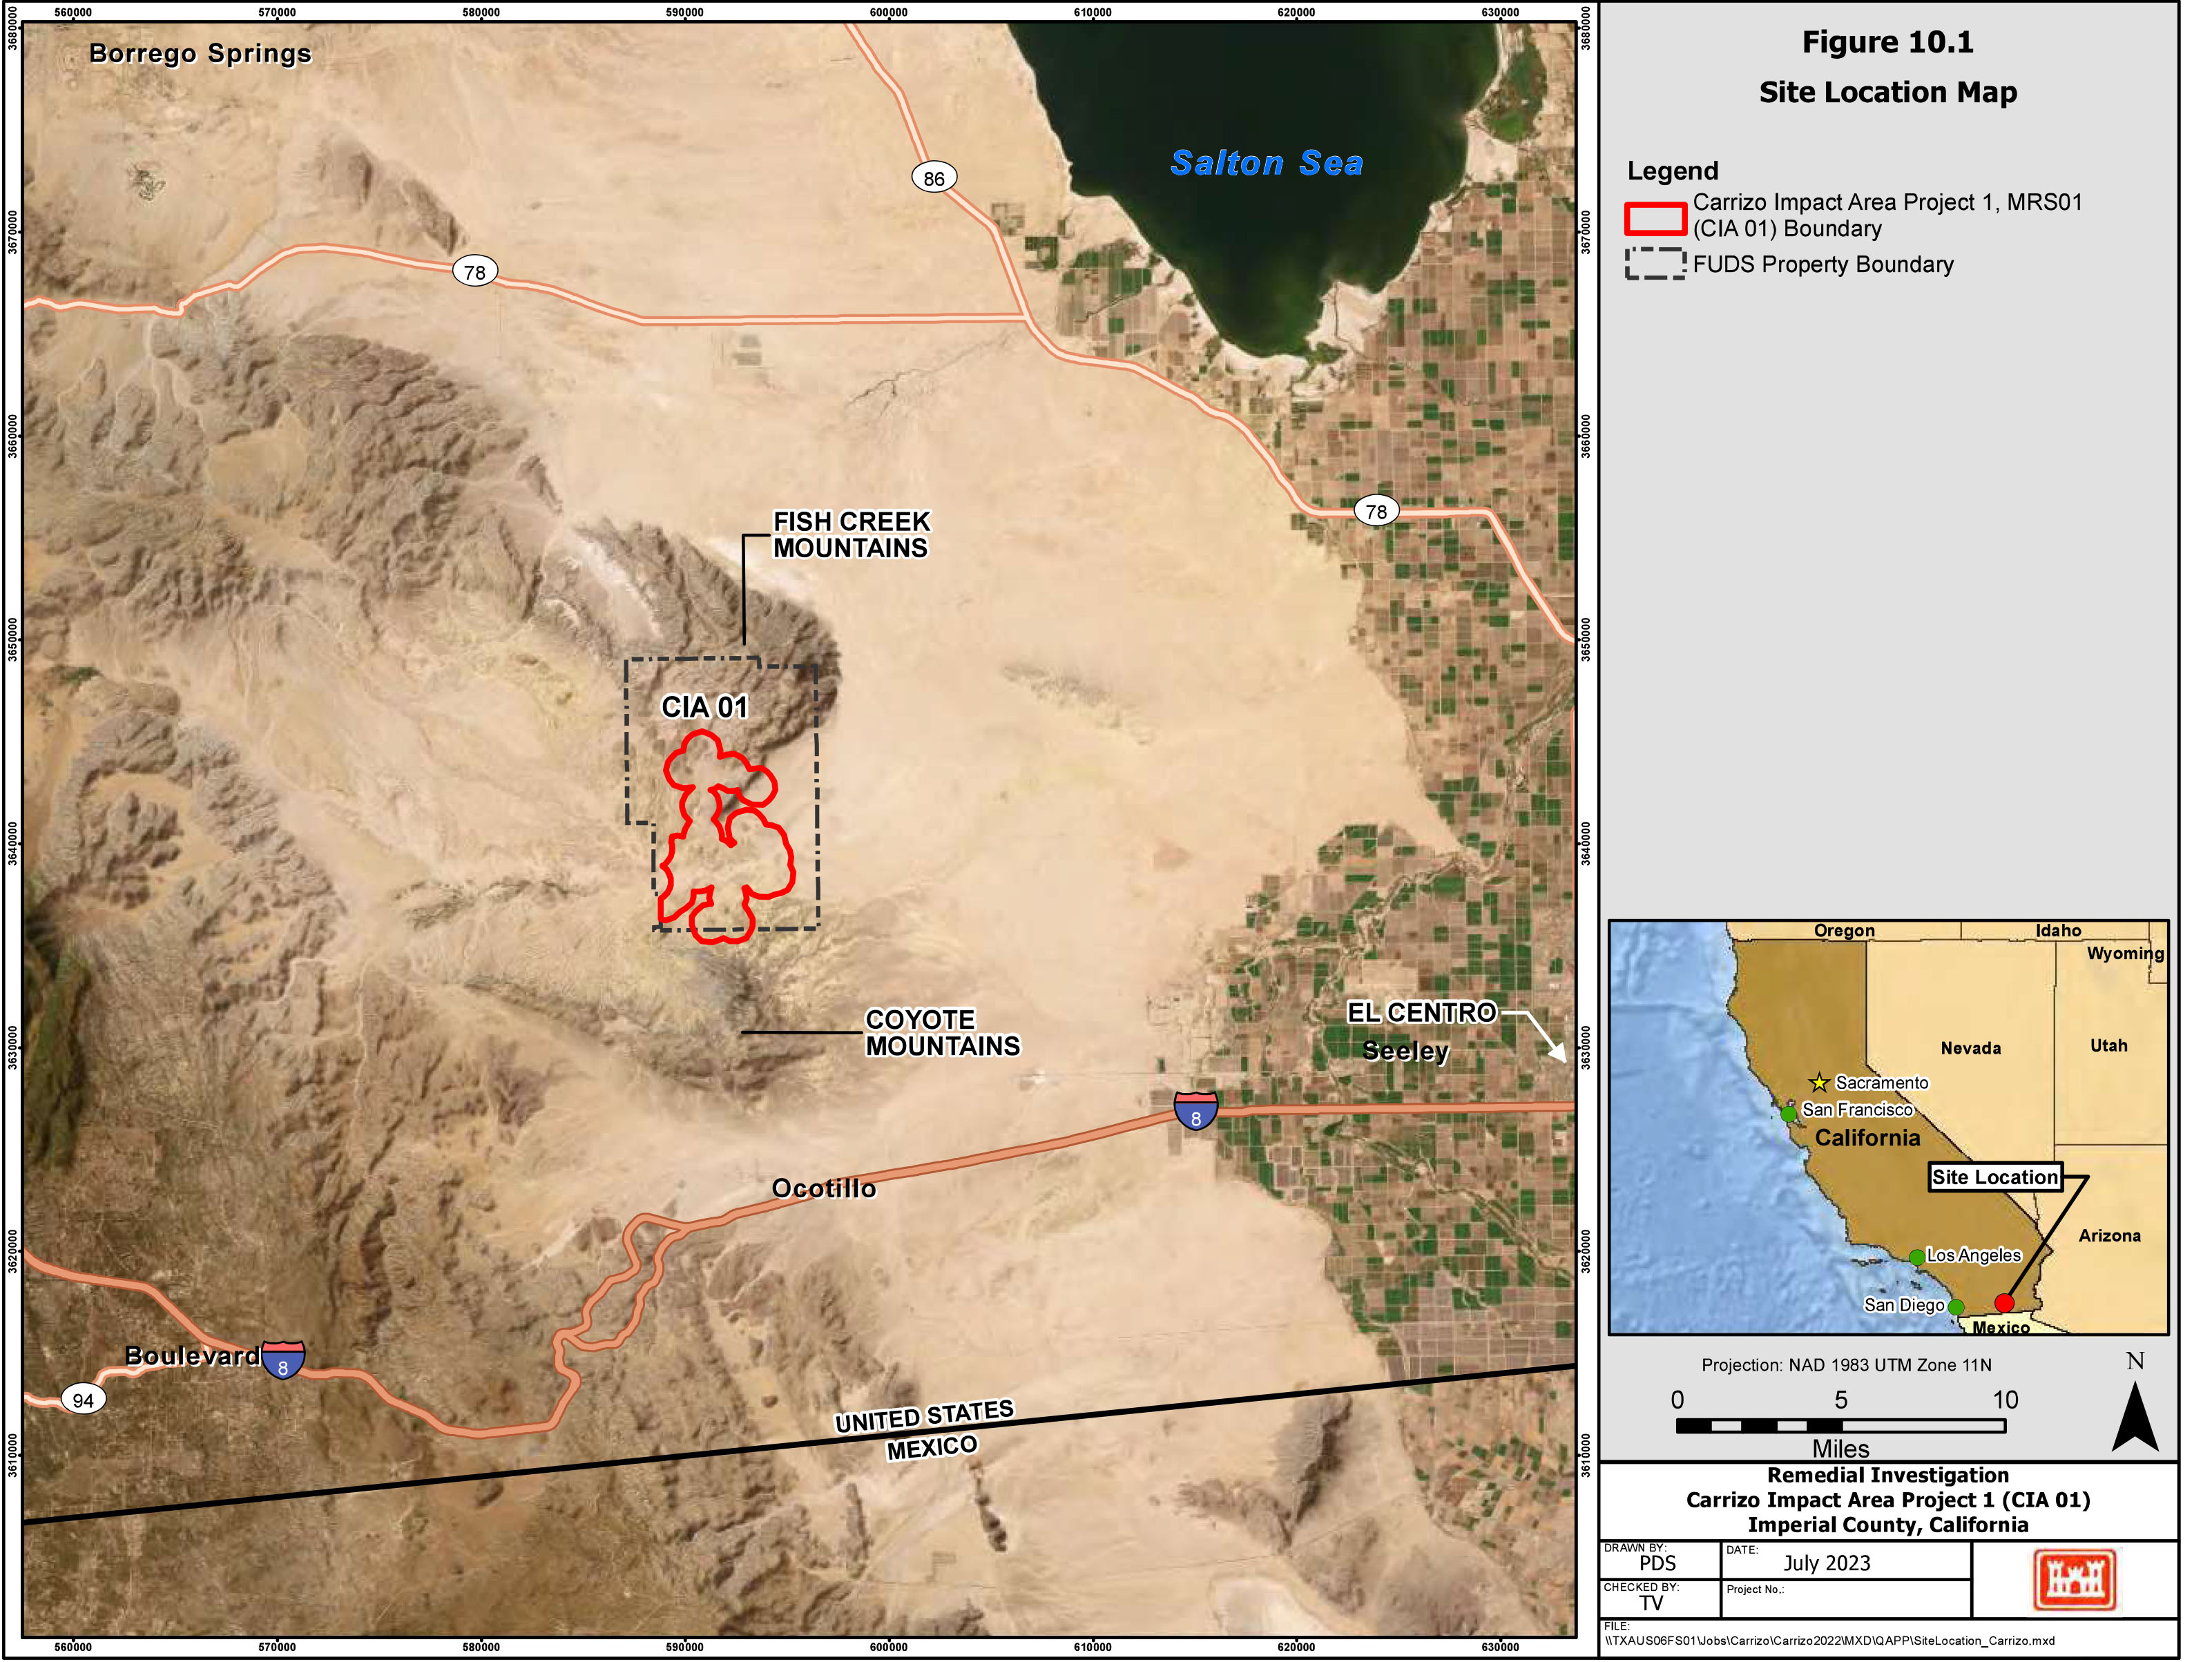 Site Location Map of Carrizo Impact Area in Imperial County, CA